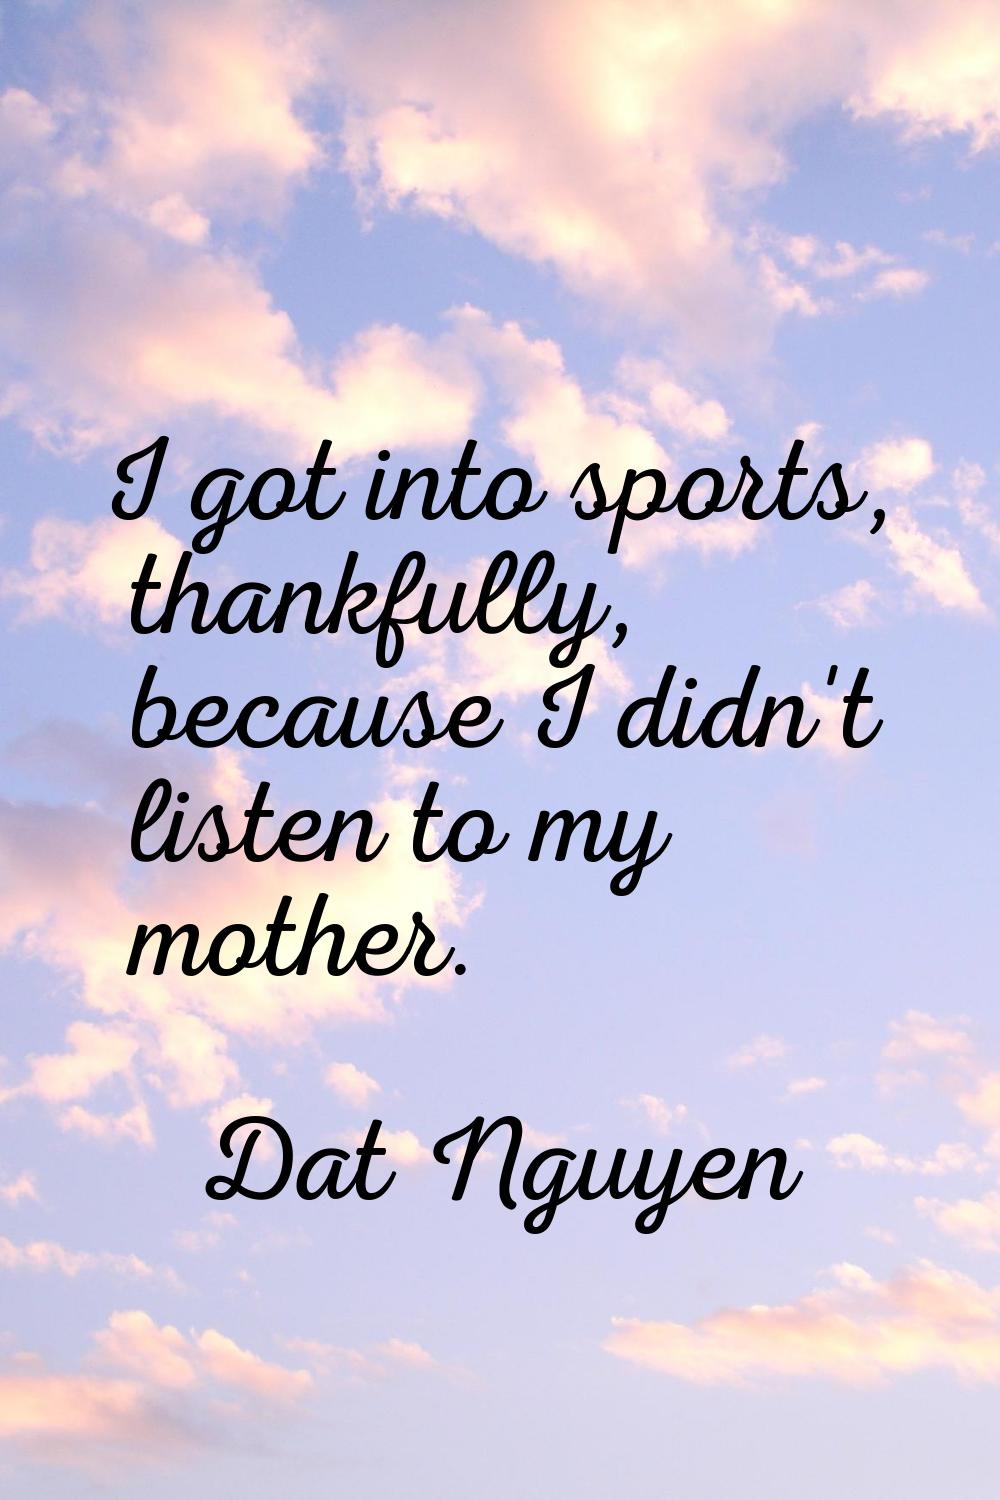 I got into sports, thankfully, because I didn't listen to my mother.